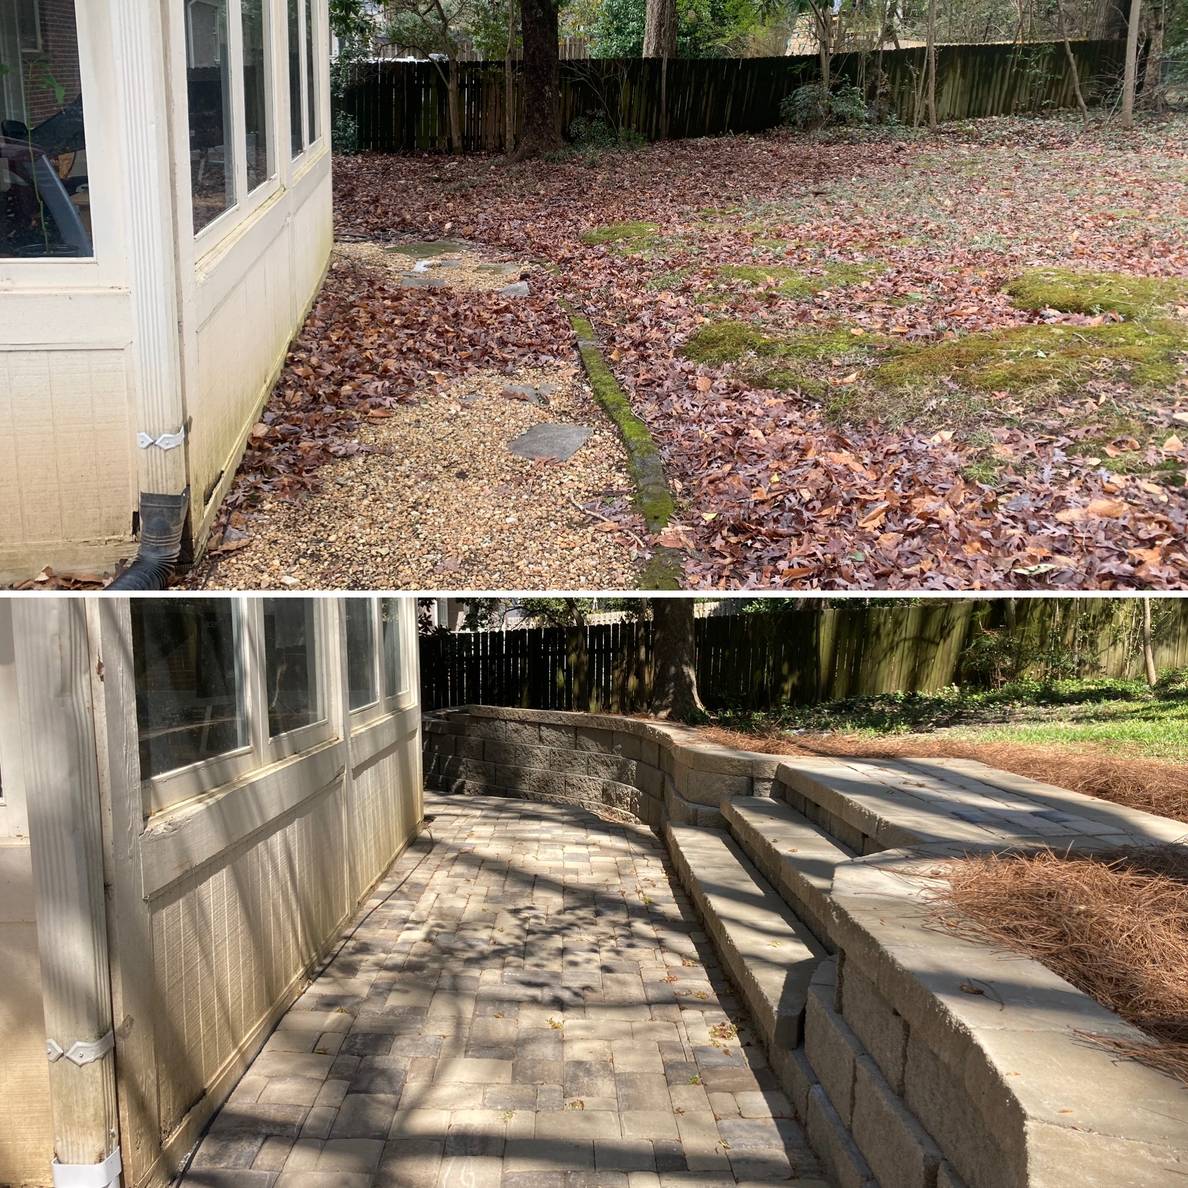 Before and After photos. To the left is the sun porch; to the right is the back yard. In the Before photo the yard slopes towards the house with a pea gravel path. In the After photo is a paver walkway with a wall and wide steps leading into the yard.